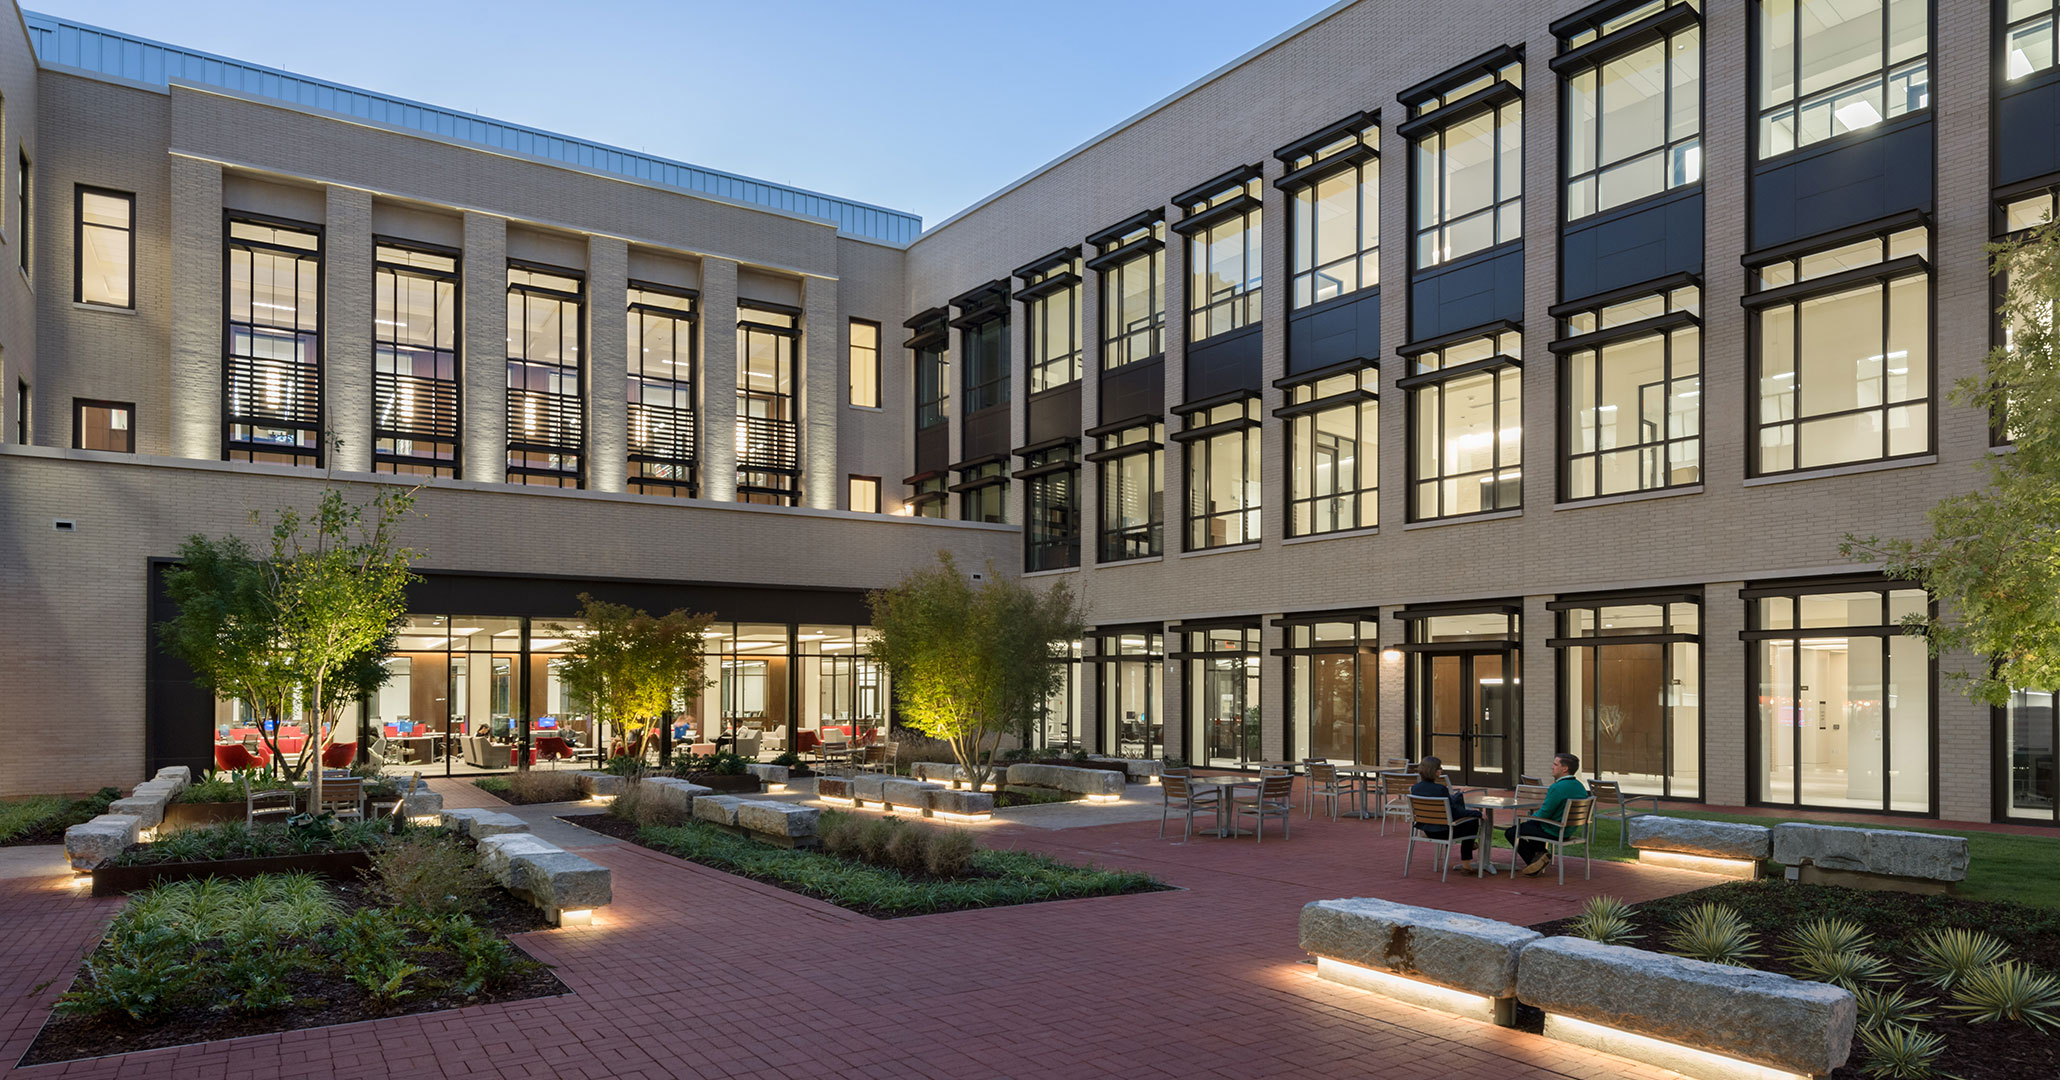 UofSC worked with Boudreaux architects to design the new Law School building.